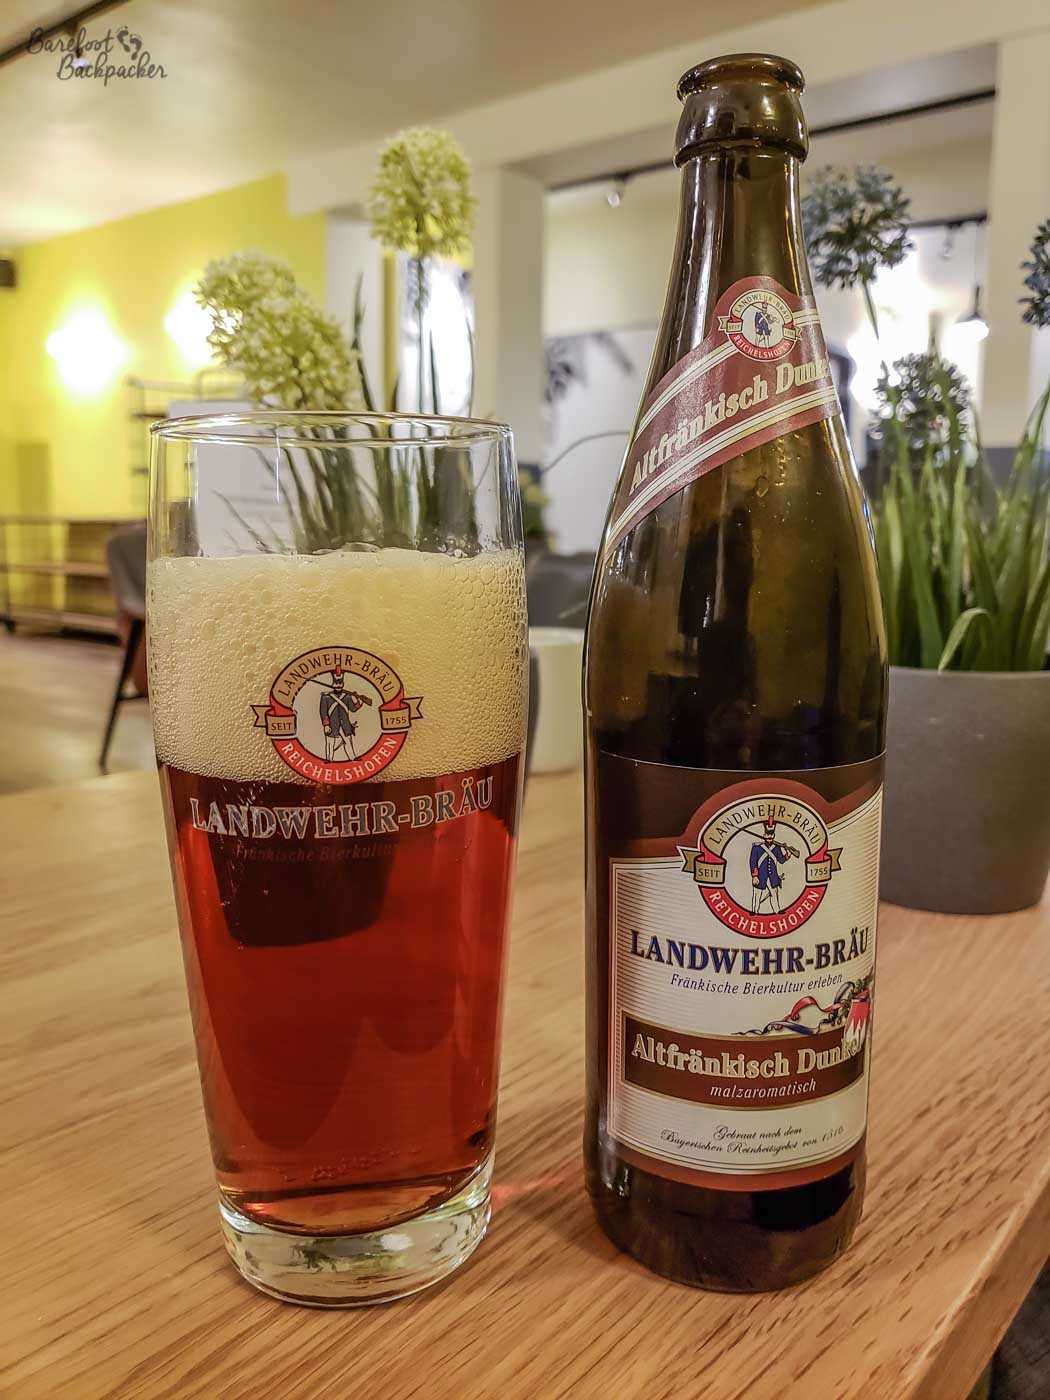 A bottle of beer labelled as 'Landwehr-Brau' is on a table next to a glass, also branded the same. The beer is more of an amber shade. At the bottom of the label on the bottle are the words 'gebraut nach dem Bayerischen Rheinheitsgebot von 1516' – translated to English, it means 'brewed after the Bavarian Rheinheitsgebot of 1516'.